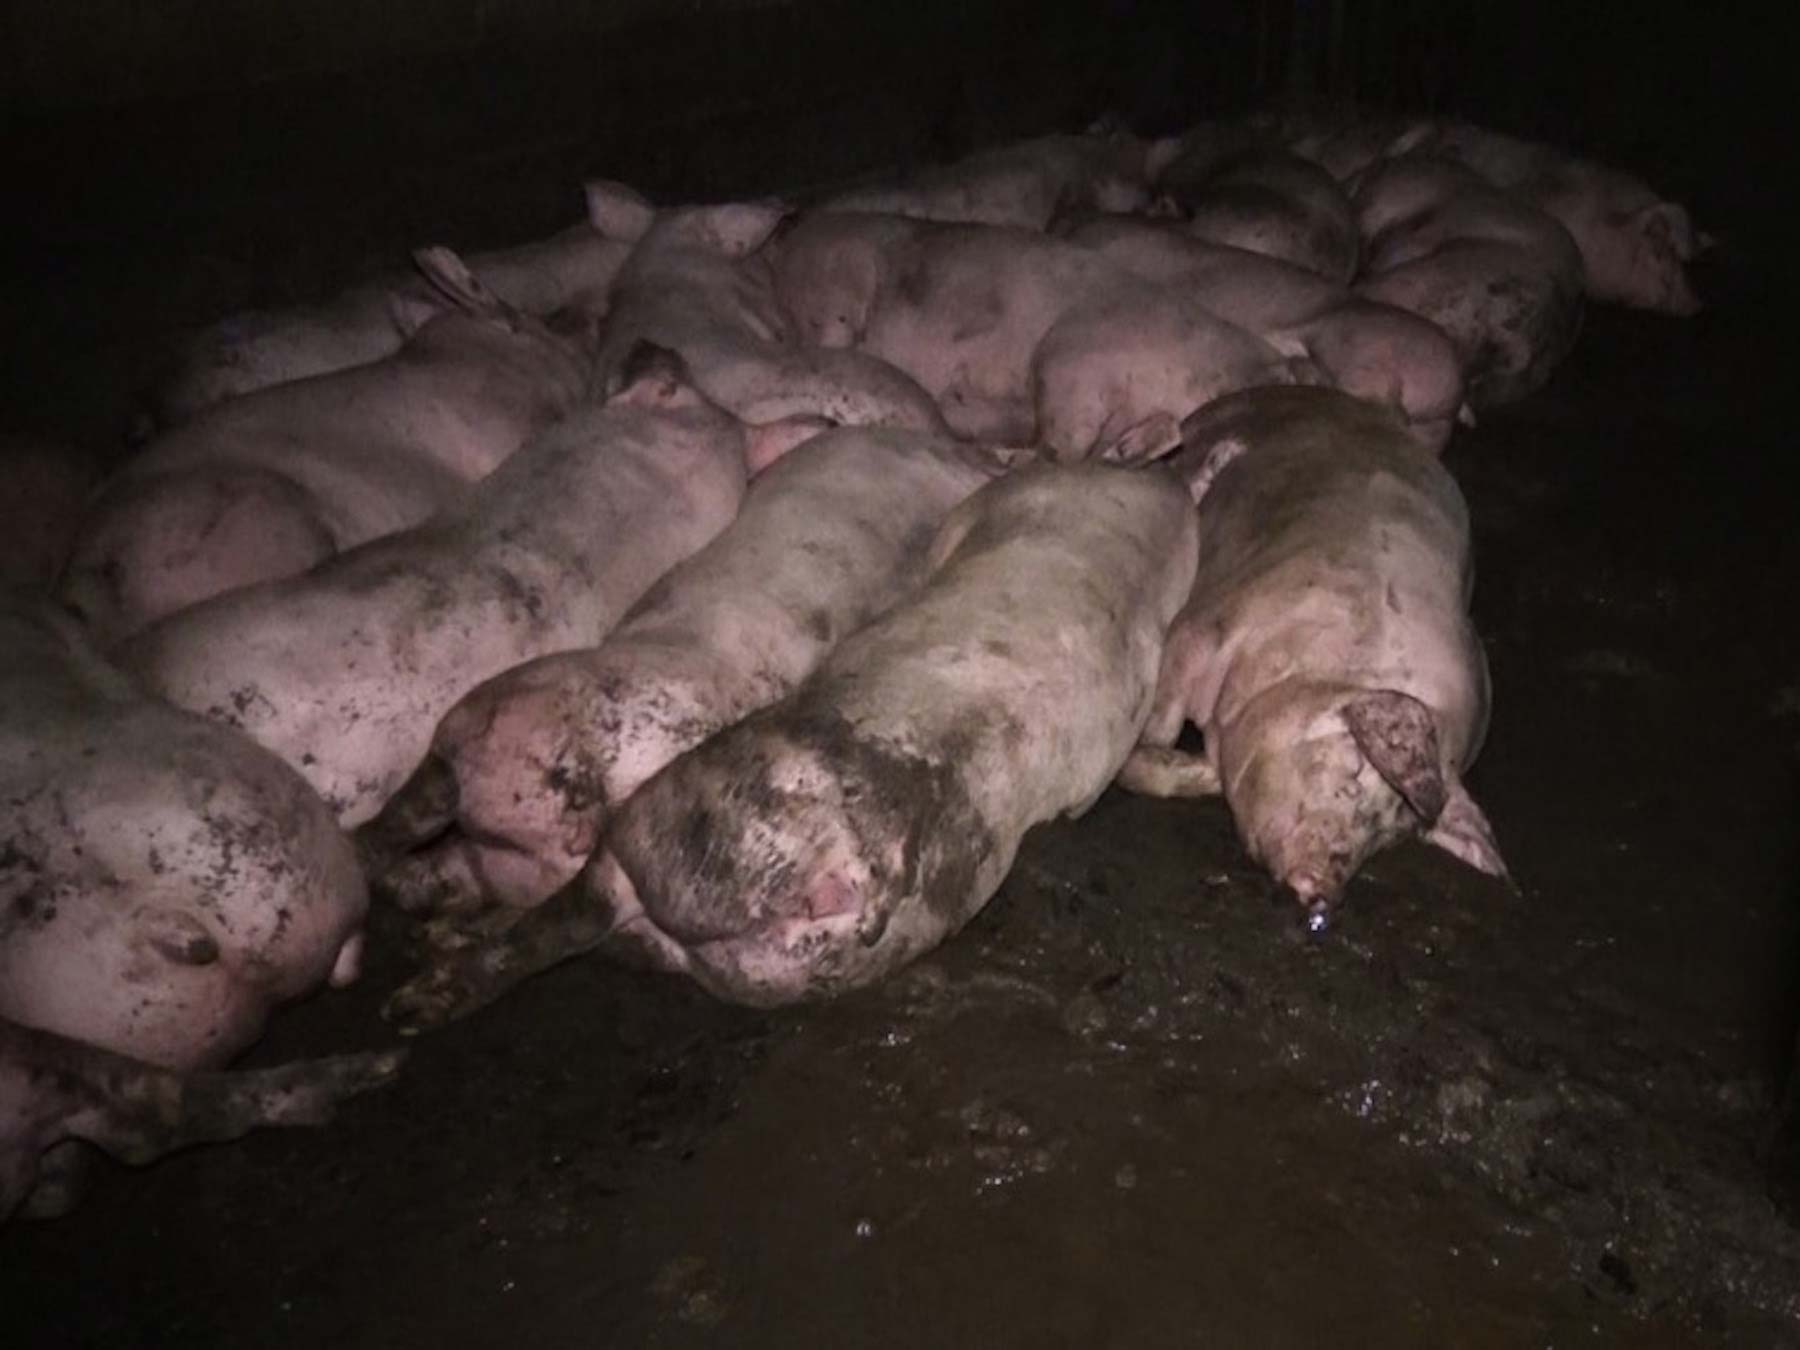 Pigs living in their own waste